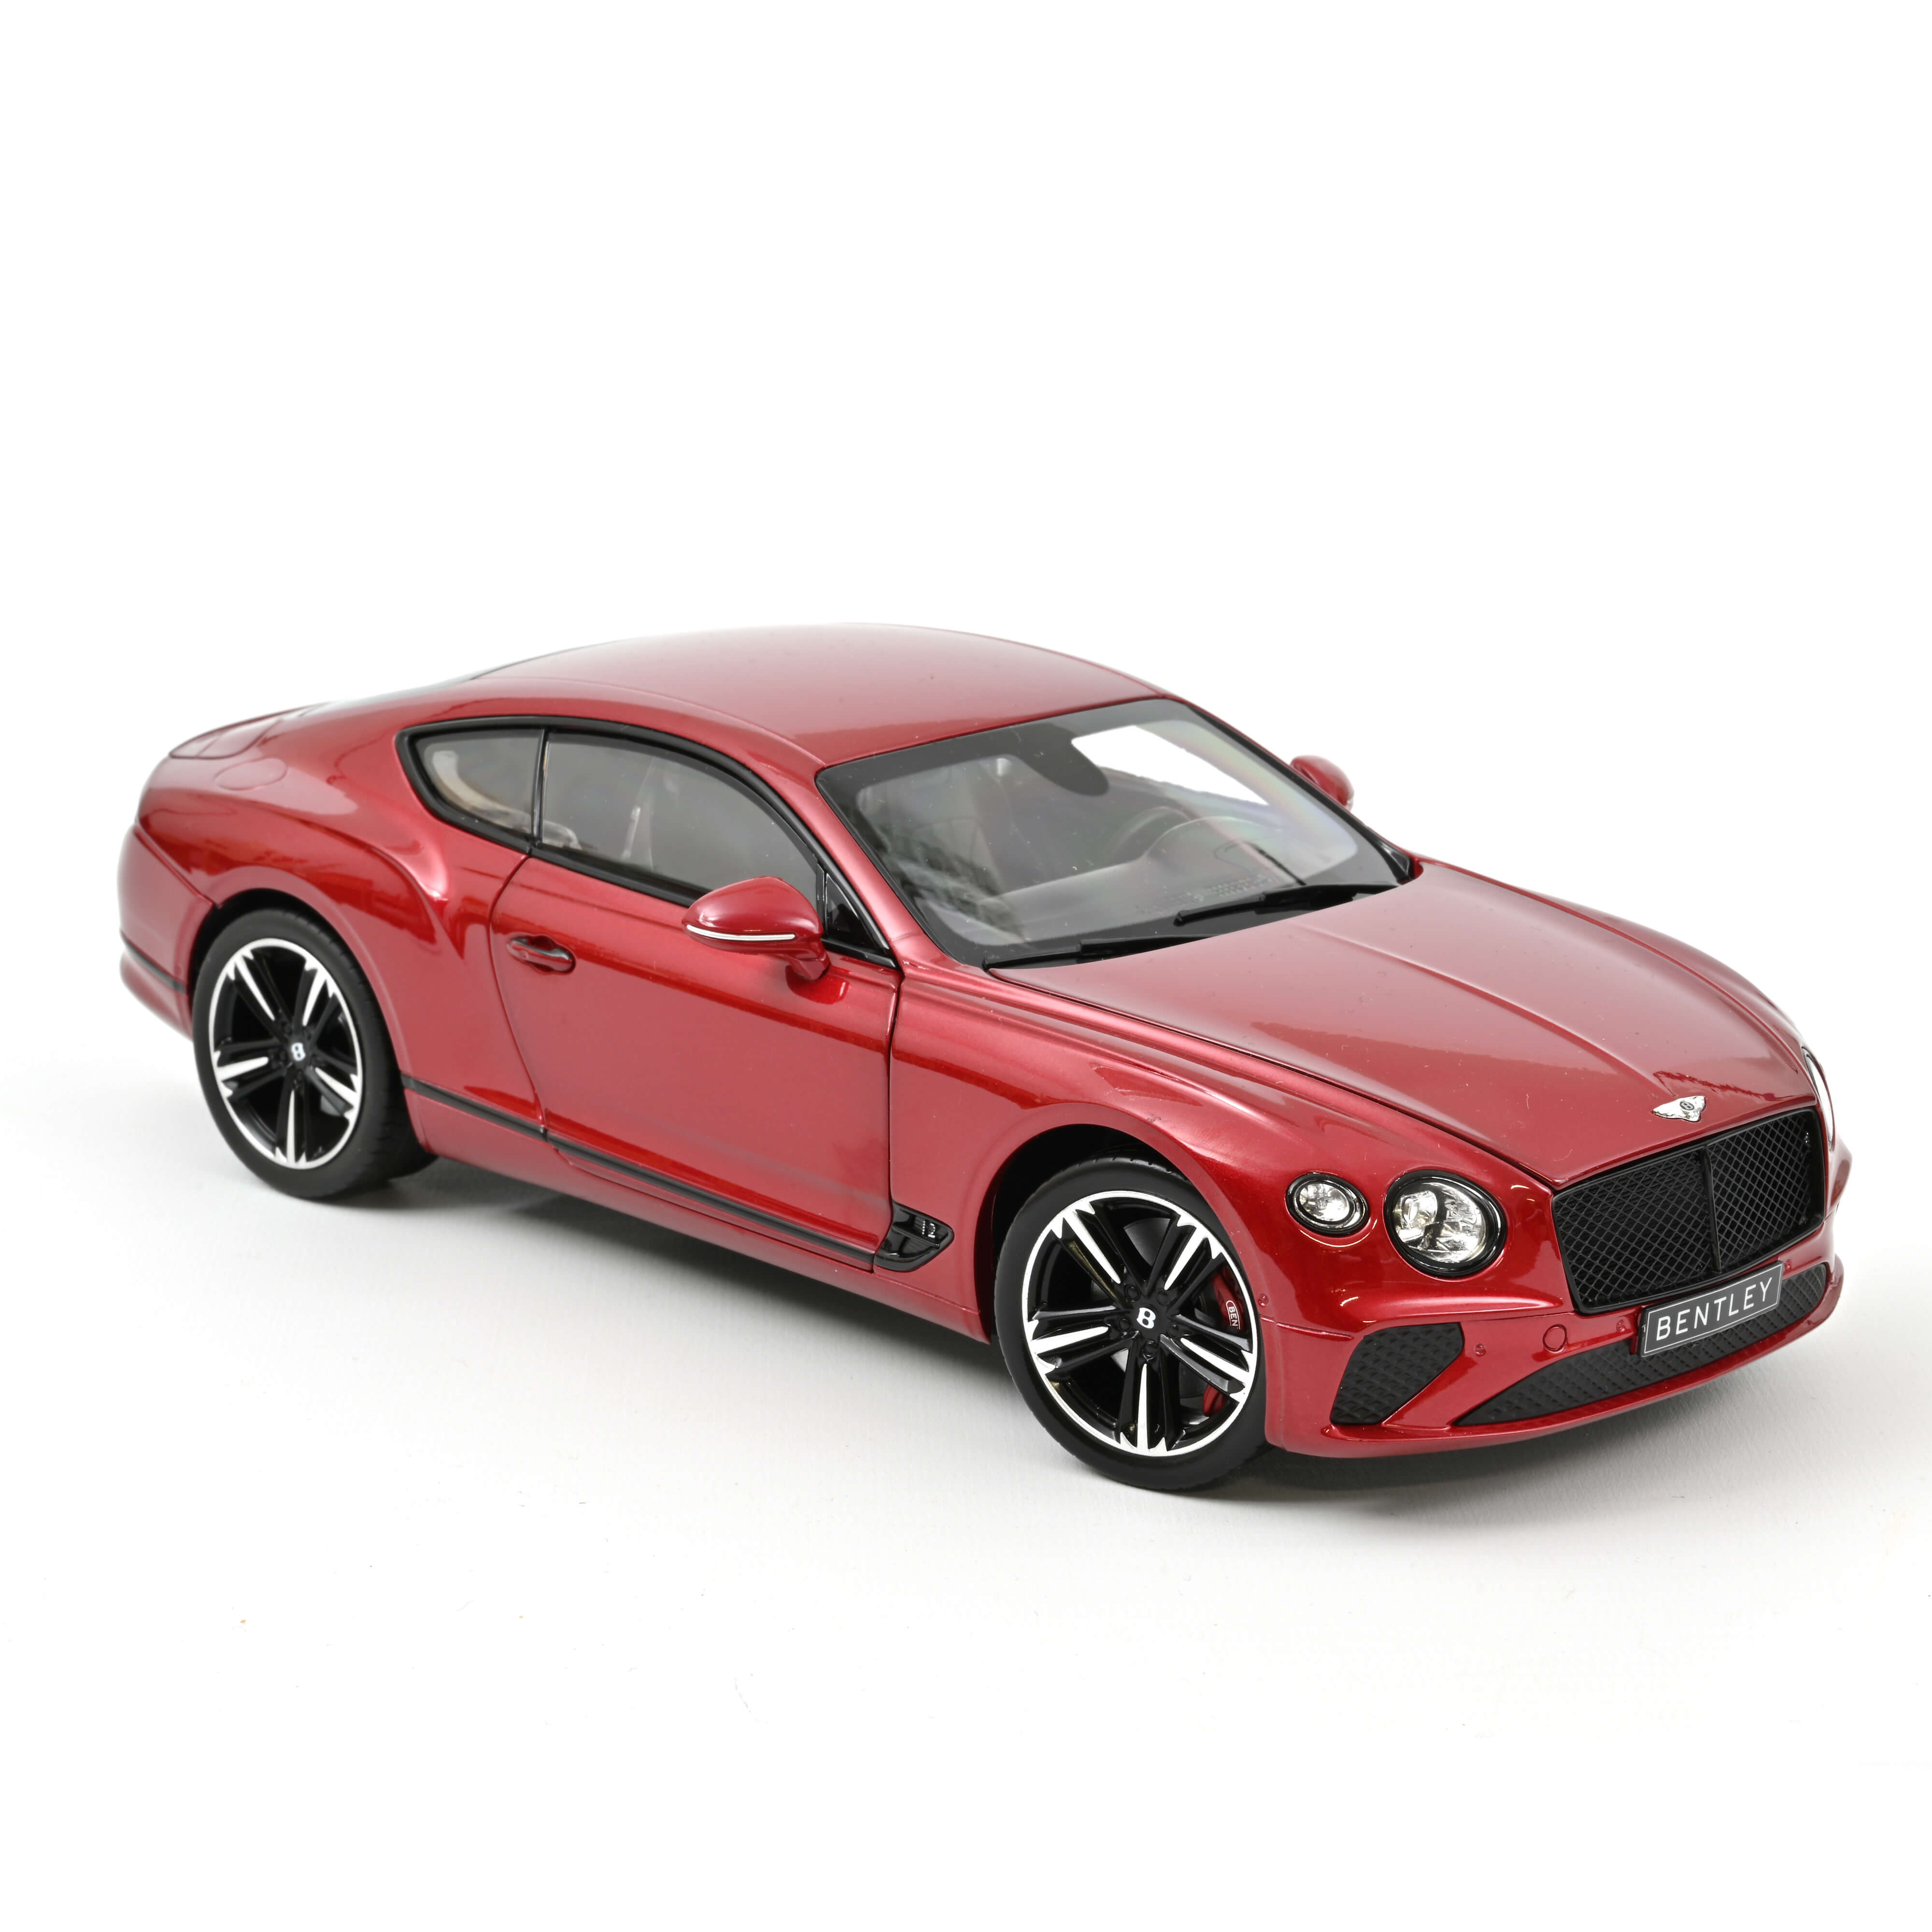 Norev 182788 Bentley Continental GT - Candy Red - 2018 1:18